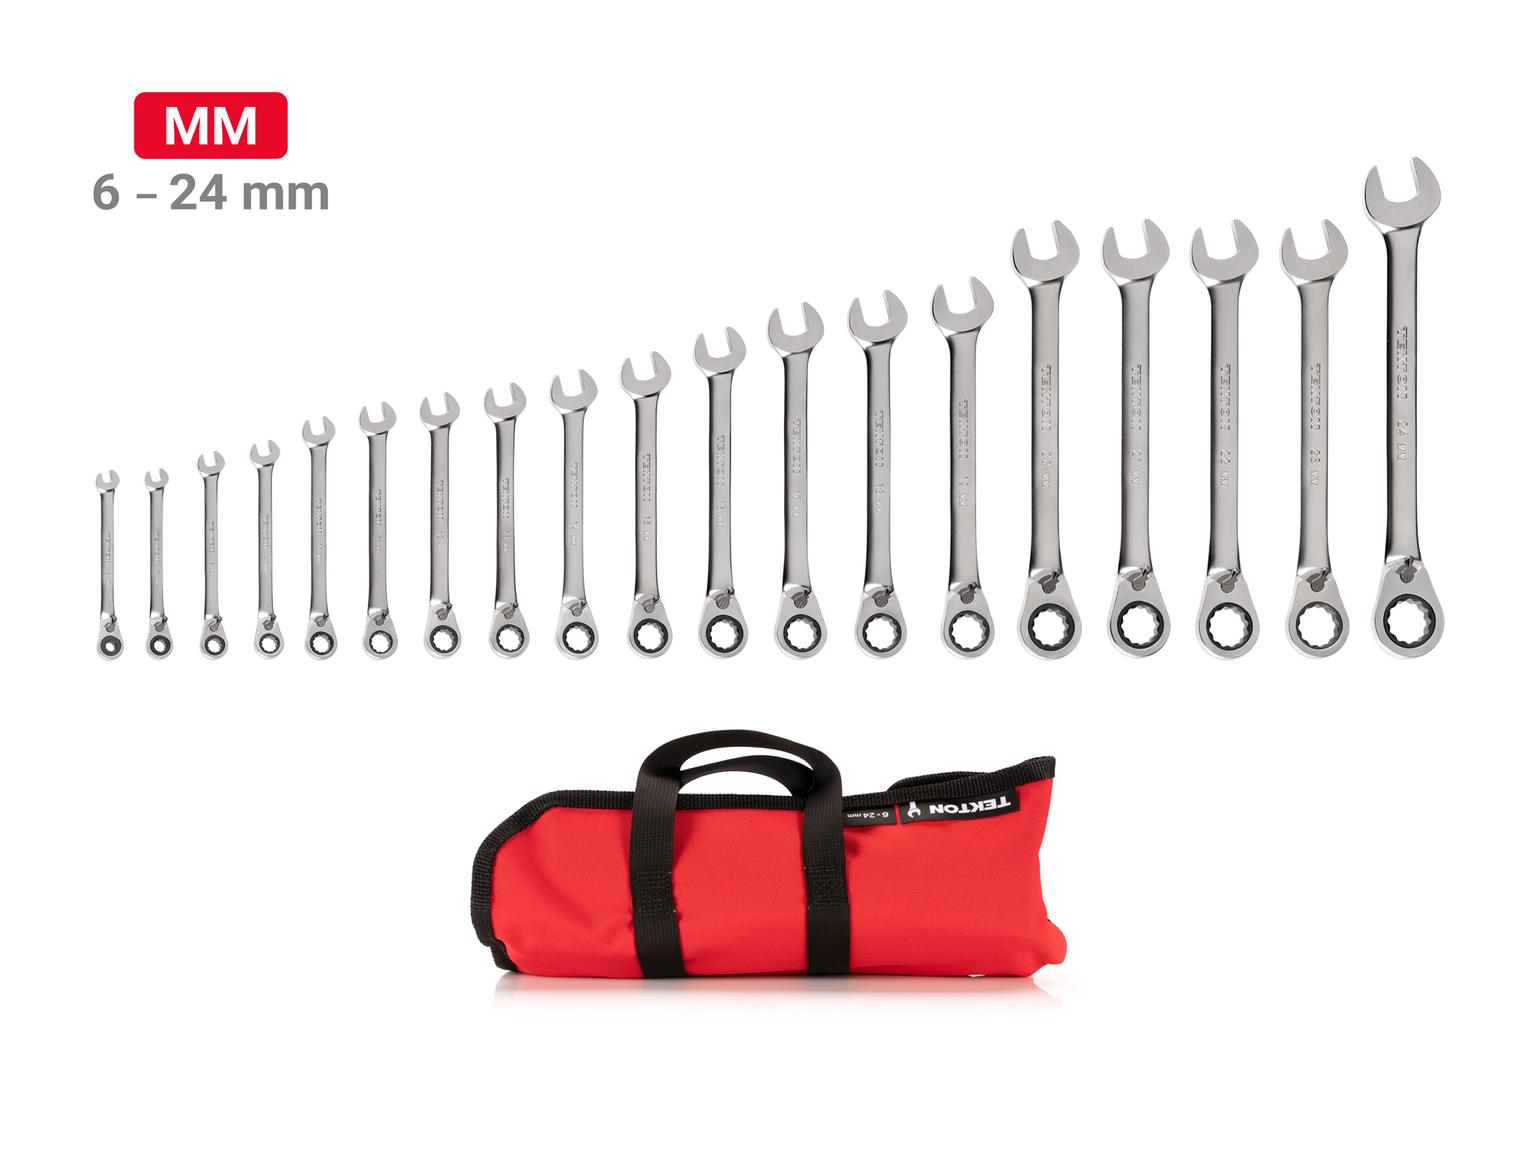 TEKTON WRC94403-T Reversible 12-Point Ratcheting Combination Wrench Set with Pouch, 19-Piece (6-24 mm)